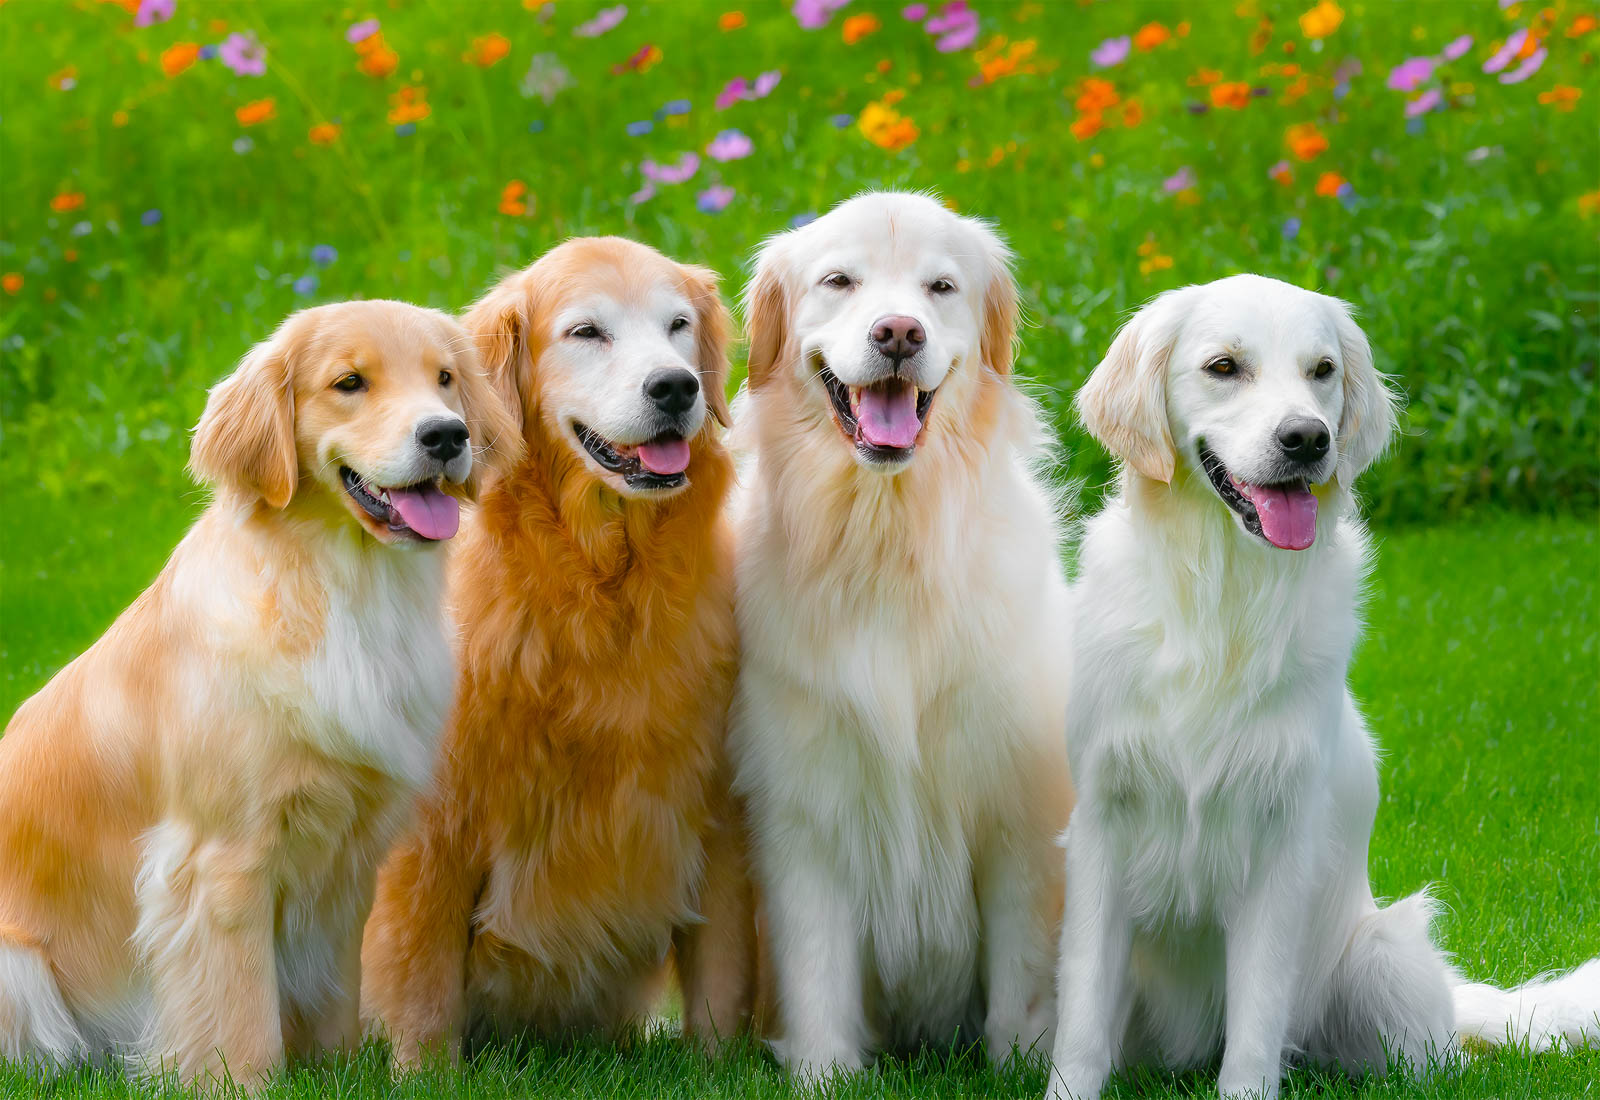 Four Golden Retrievers smiling on a summer day